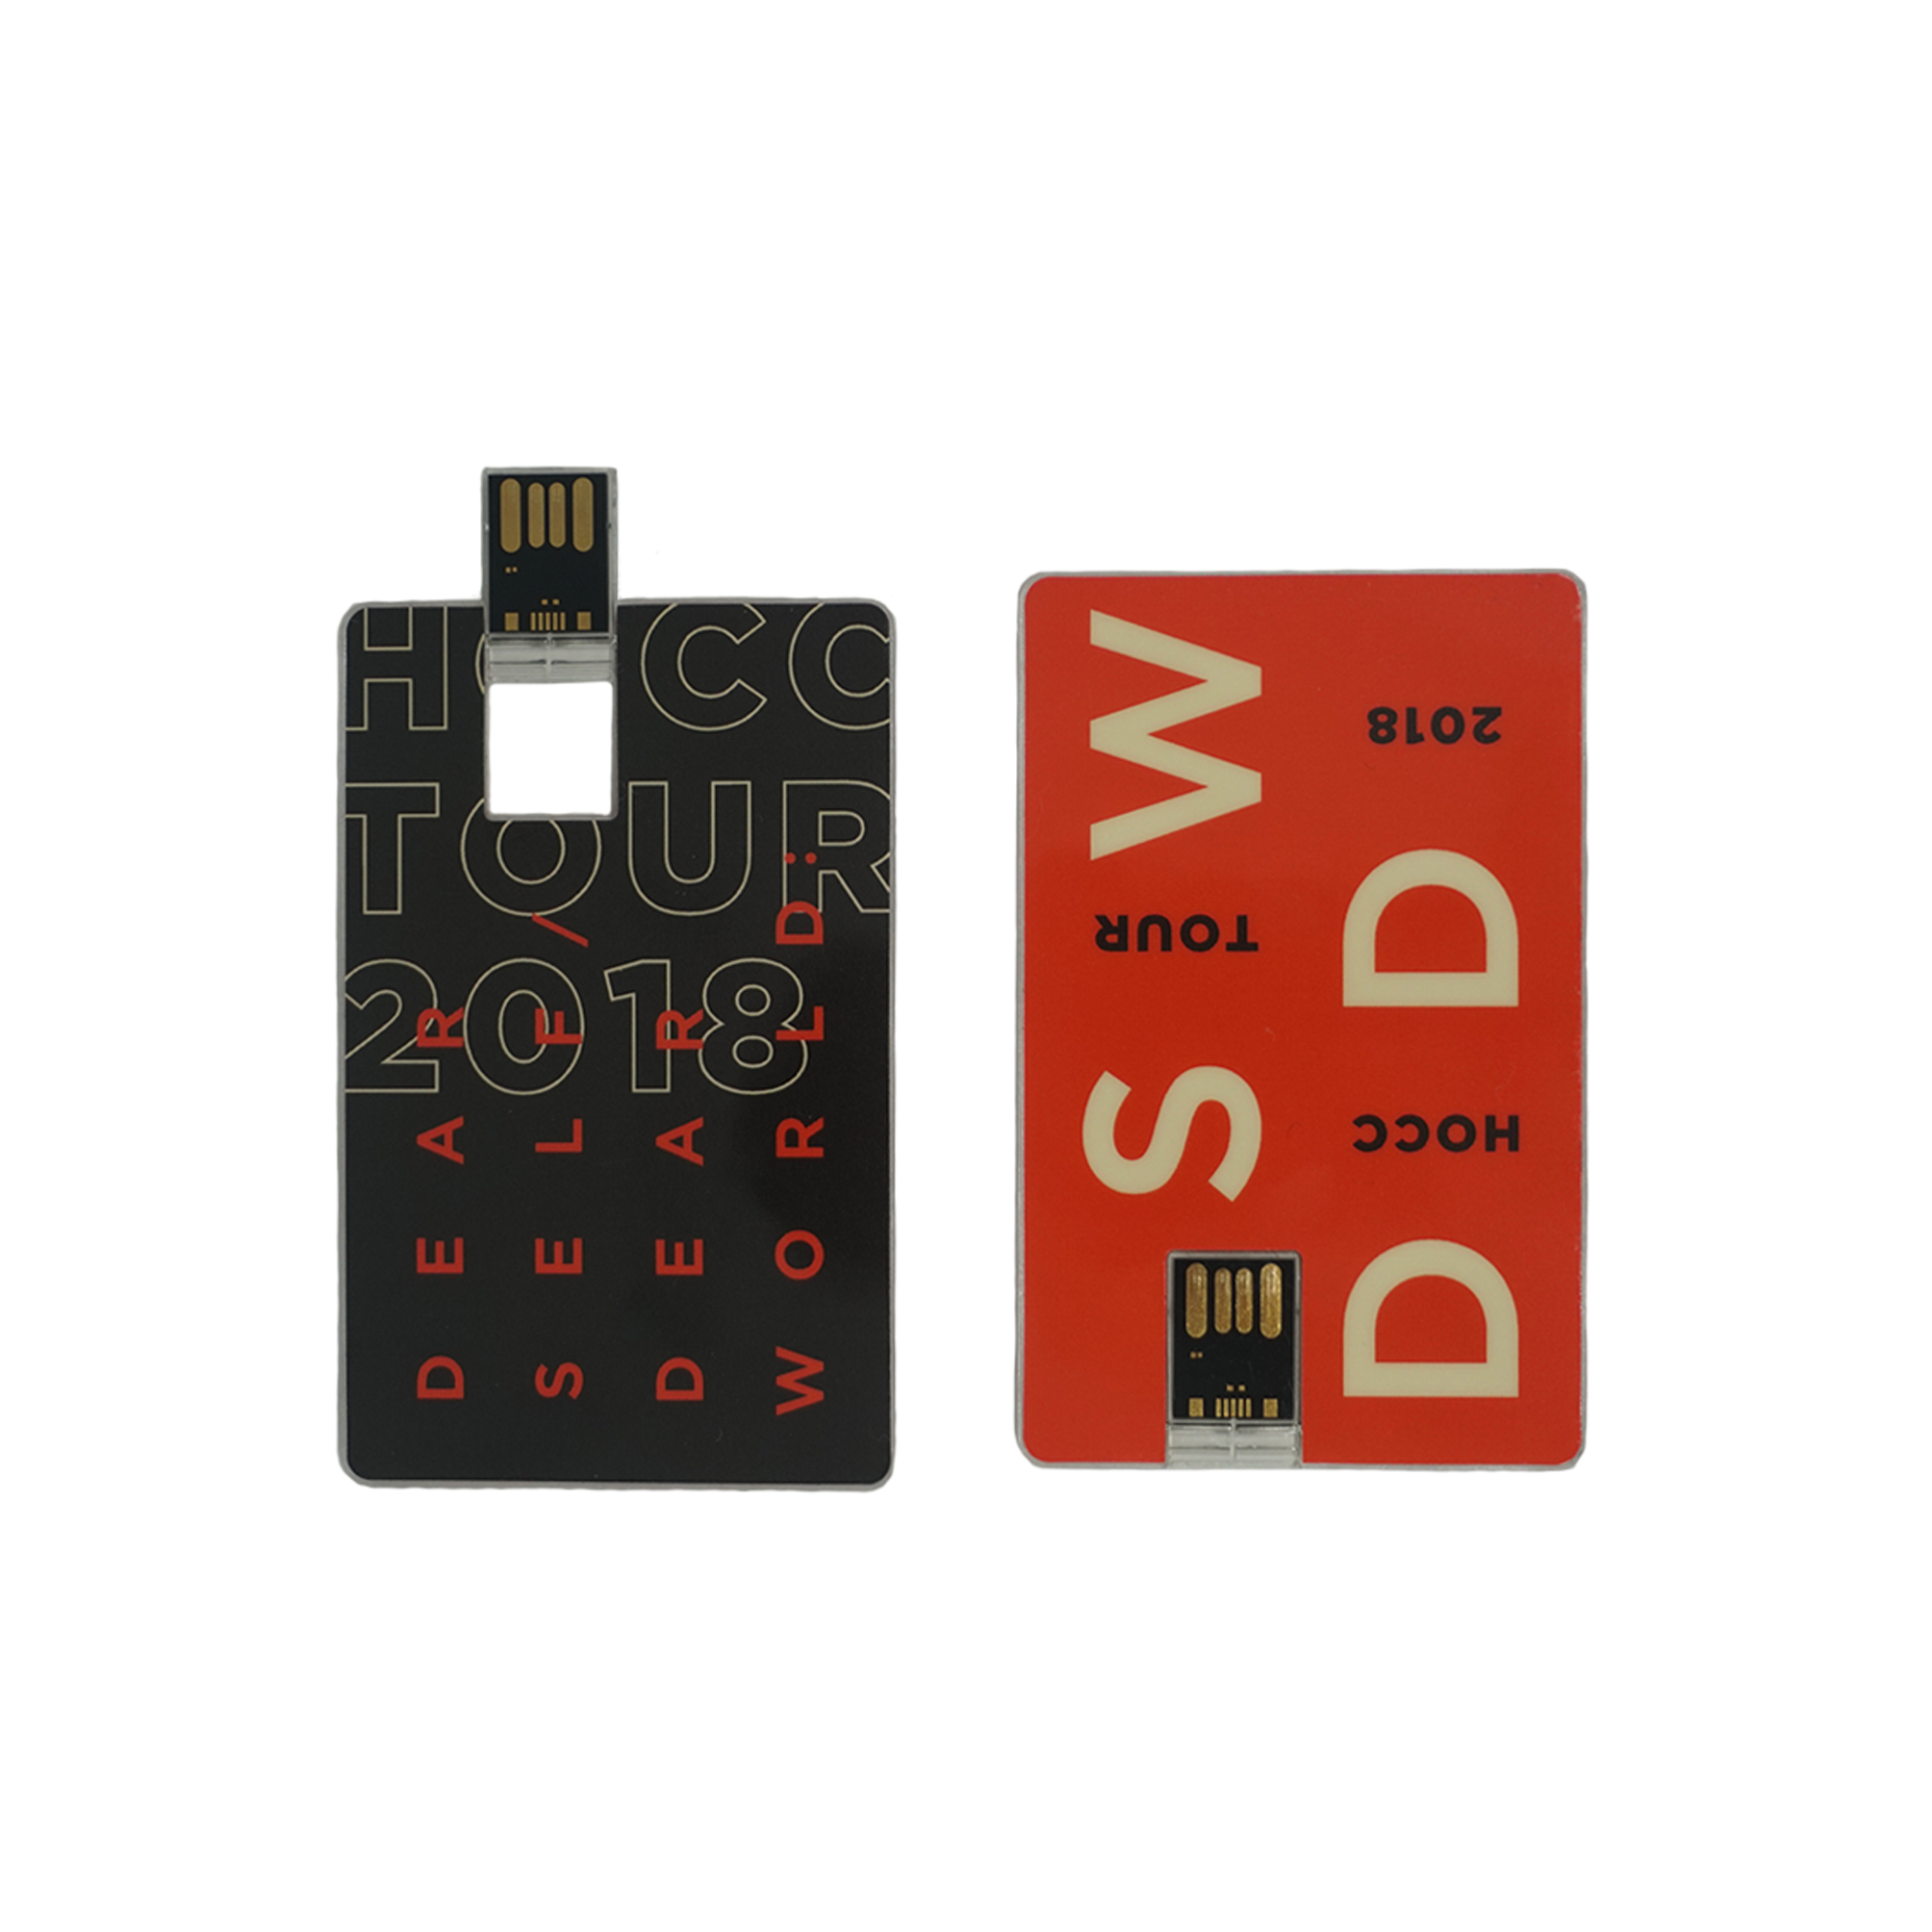 DSDW TOUR USB (with special gift pack) • Hall1c